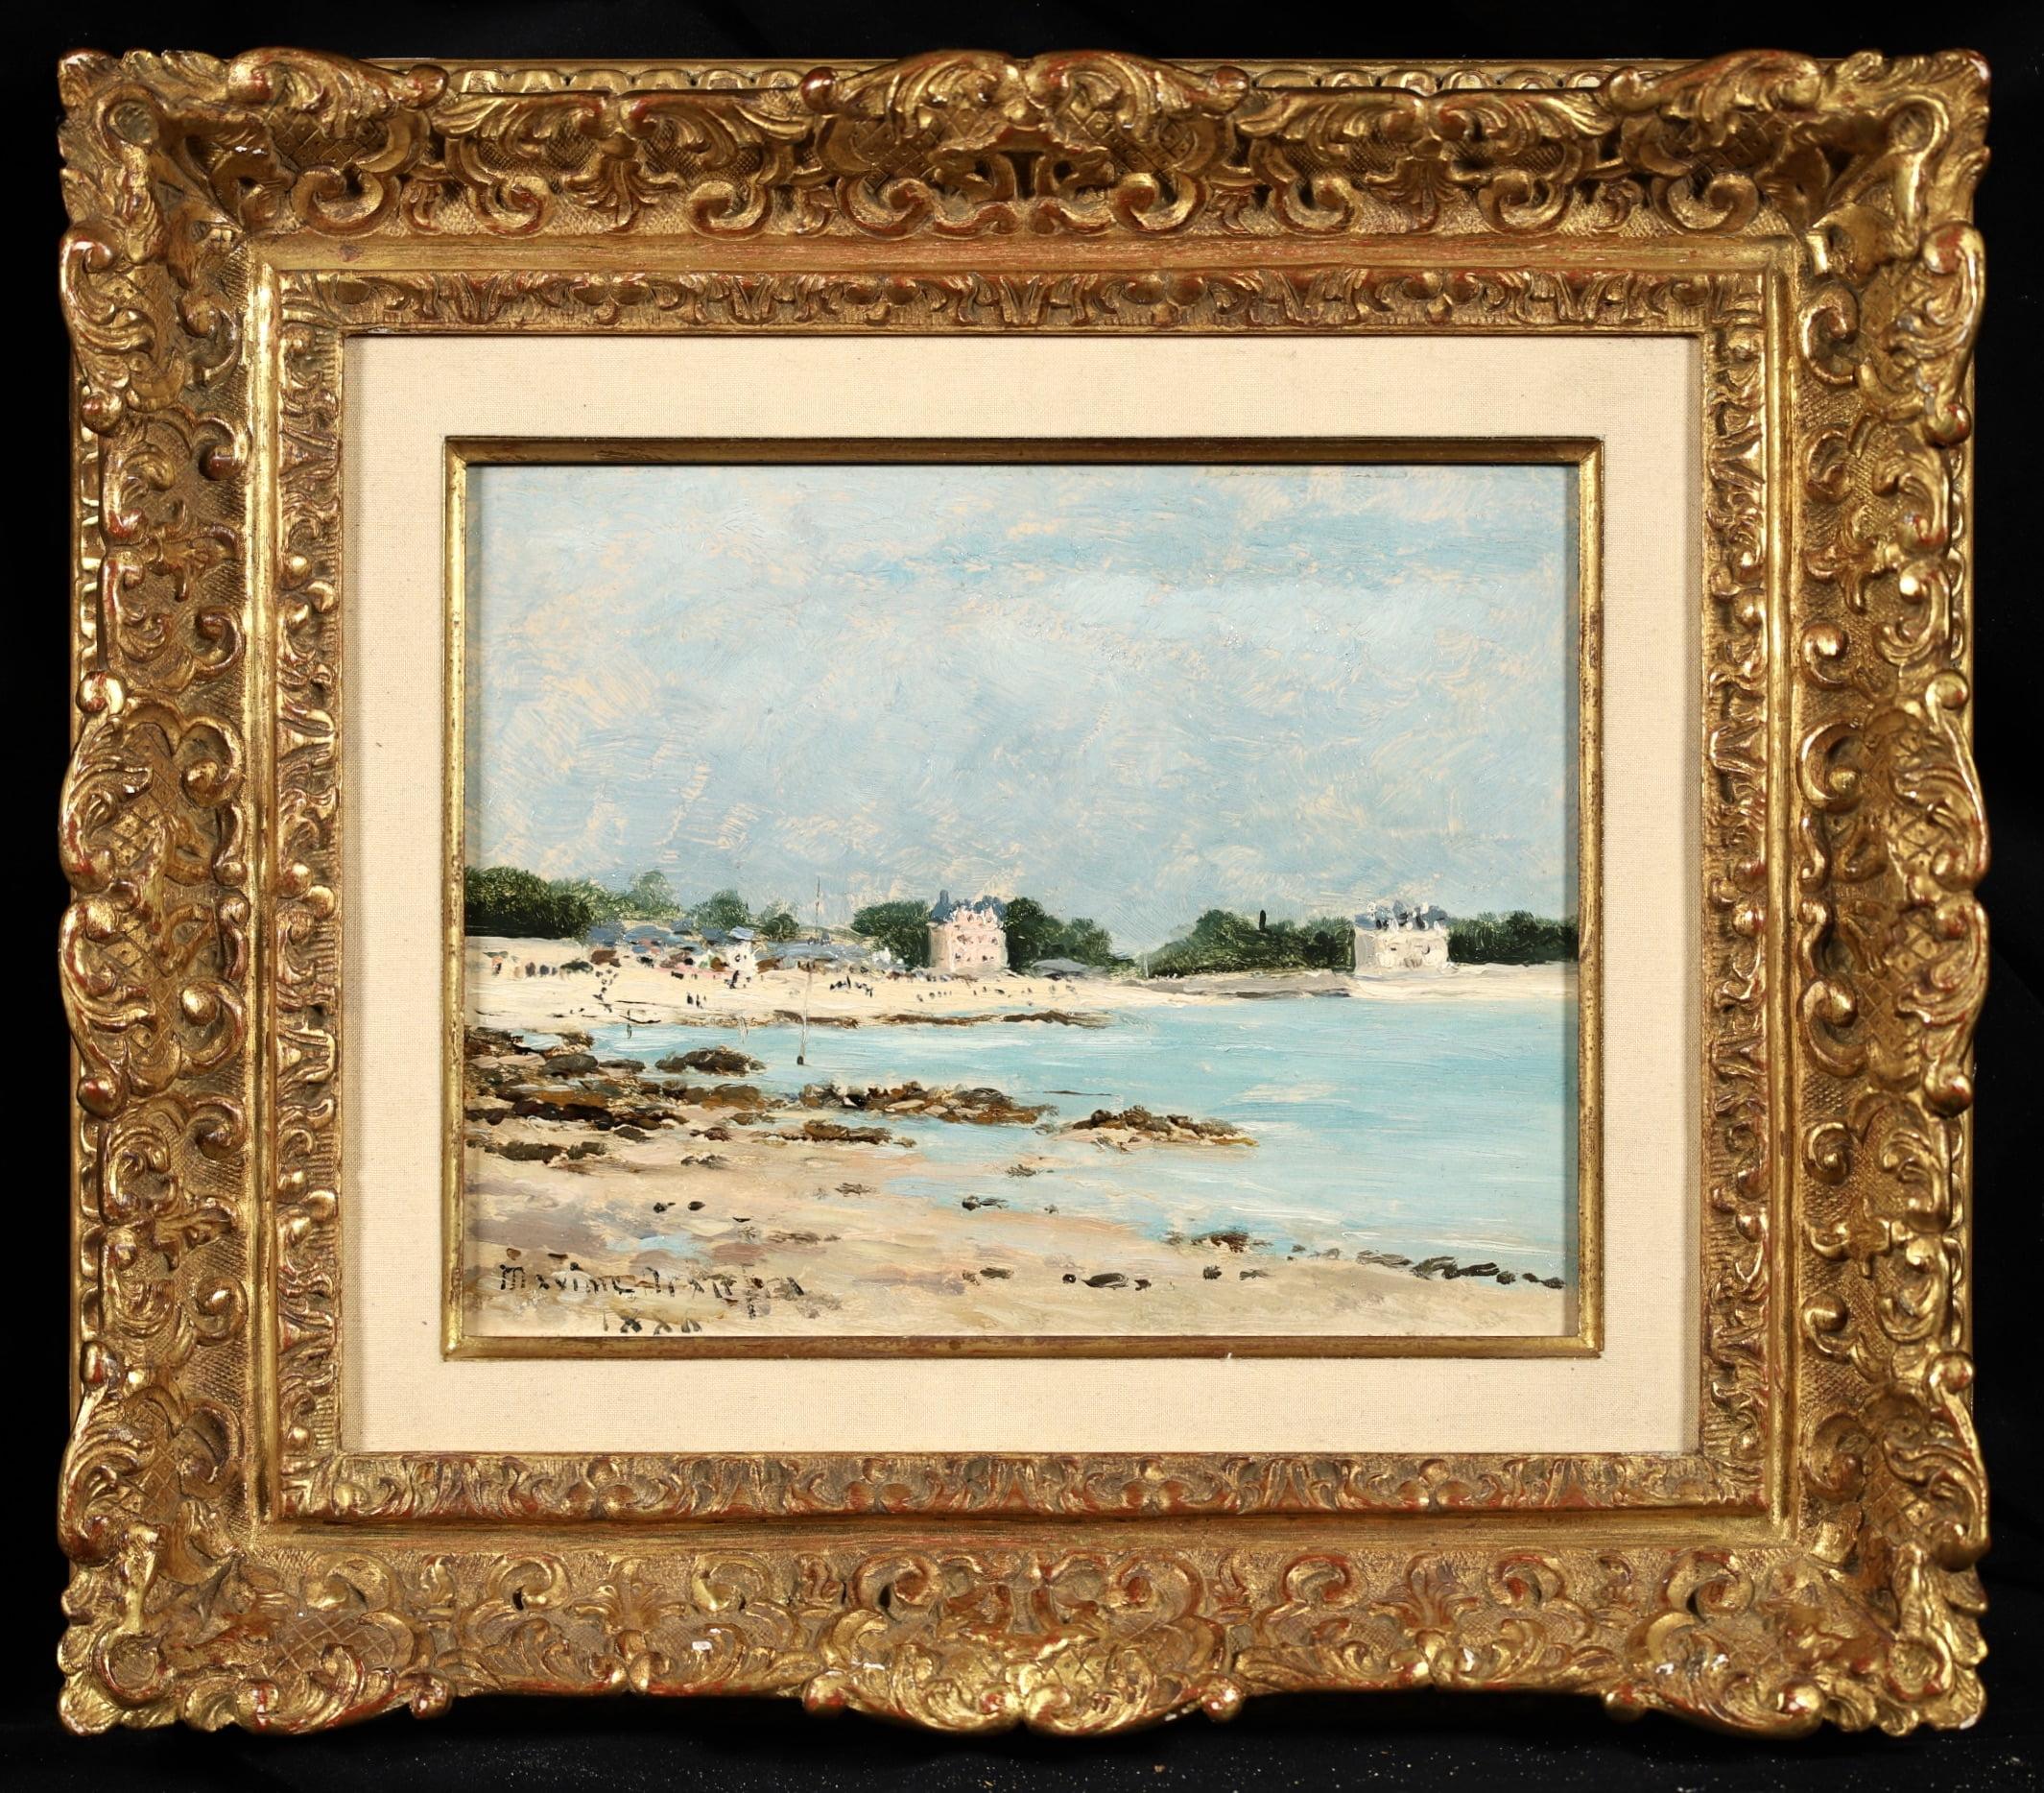 Signed and dated impressionist oil on panel seascape painting by French painter Maxime Maufra. This stunning work depicts the beach at Morgat in Brittany, northwest France. The crystal blue water is surrounded by a golden-sanded beach. The is a line